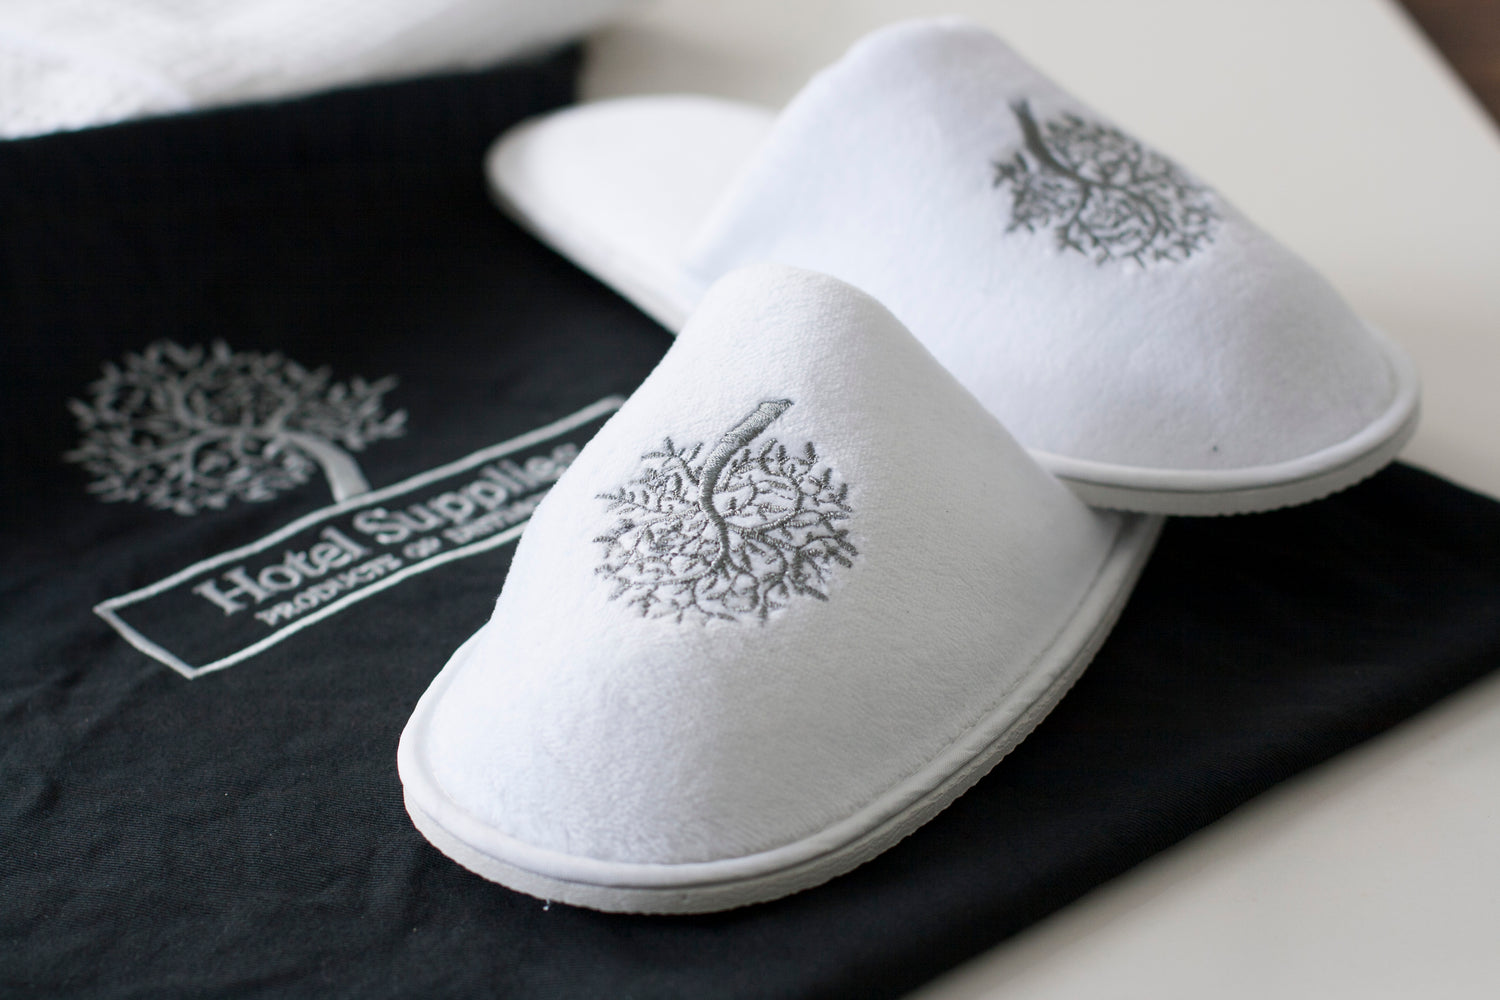 Bespoke slippers and hotel bags